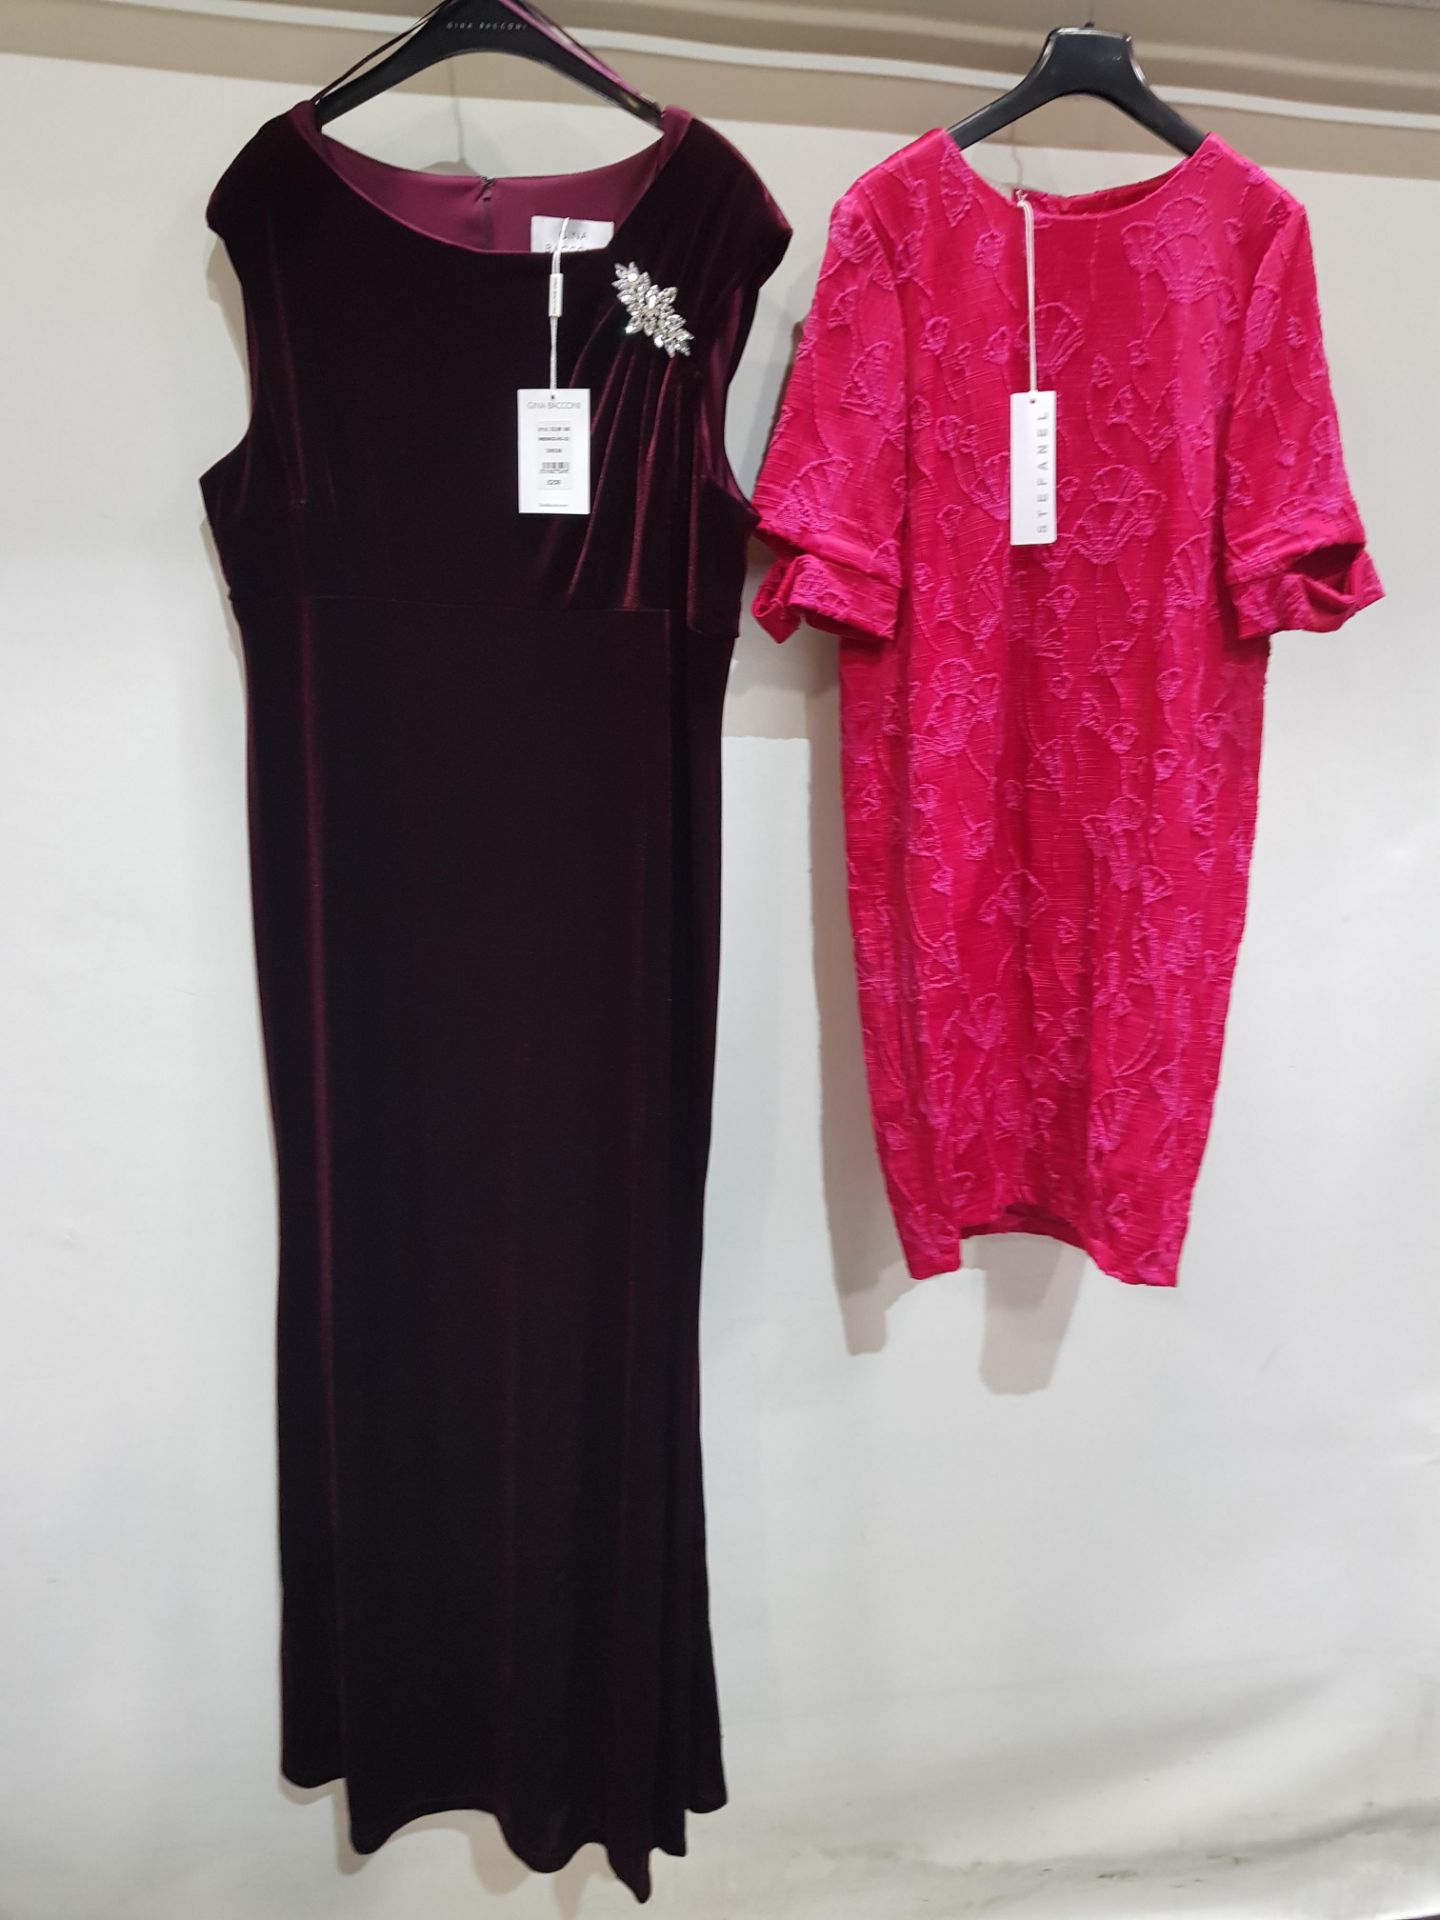 4 X BRAND NEW MIXED DRESS LOT CONTAINING 2X GINA BACCONI PARTYS DRESSES IN SIZES 20-22 - RP£250 2X